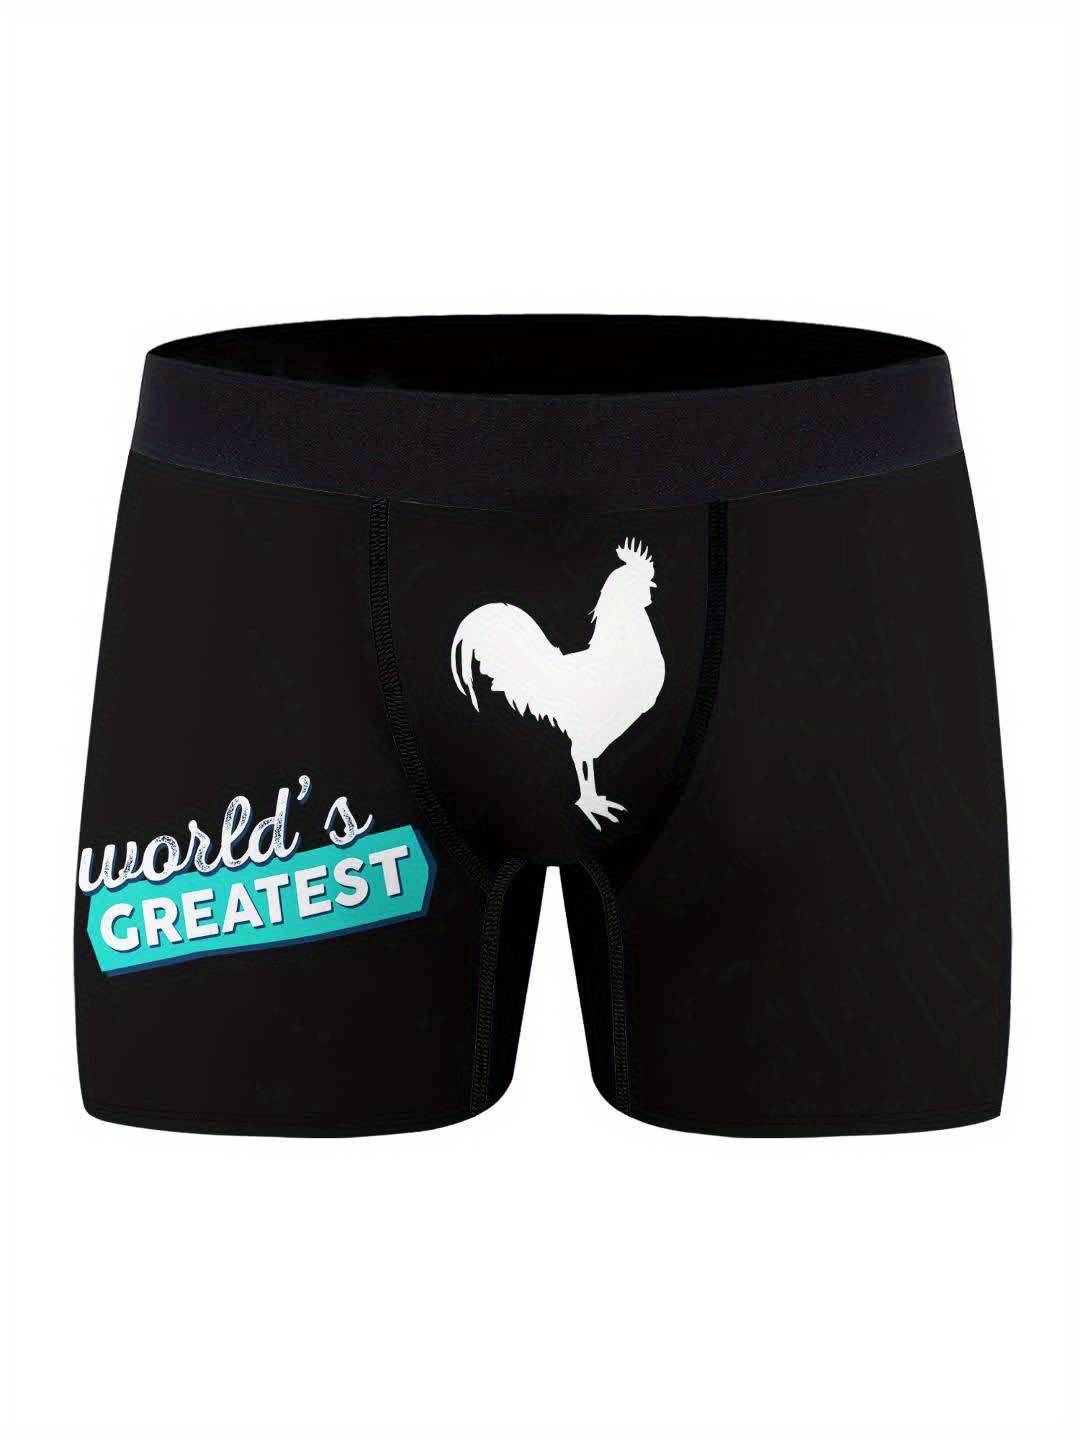 Big Rooster Mens Boxers - Funny Valentines Day Gift - Vanity